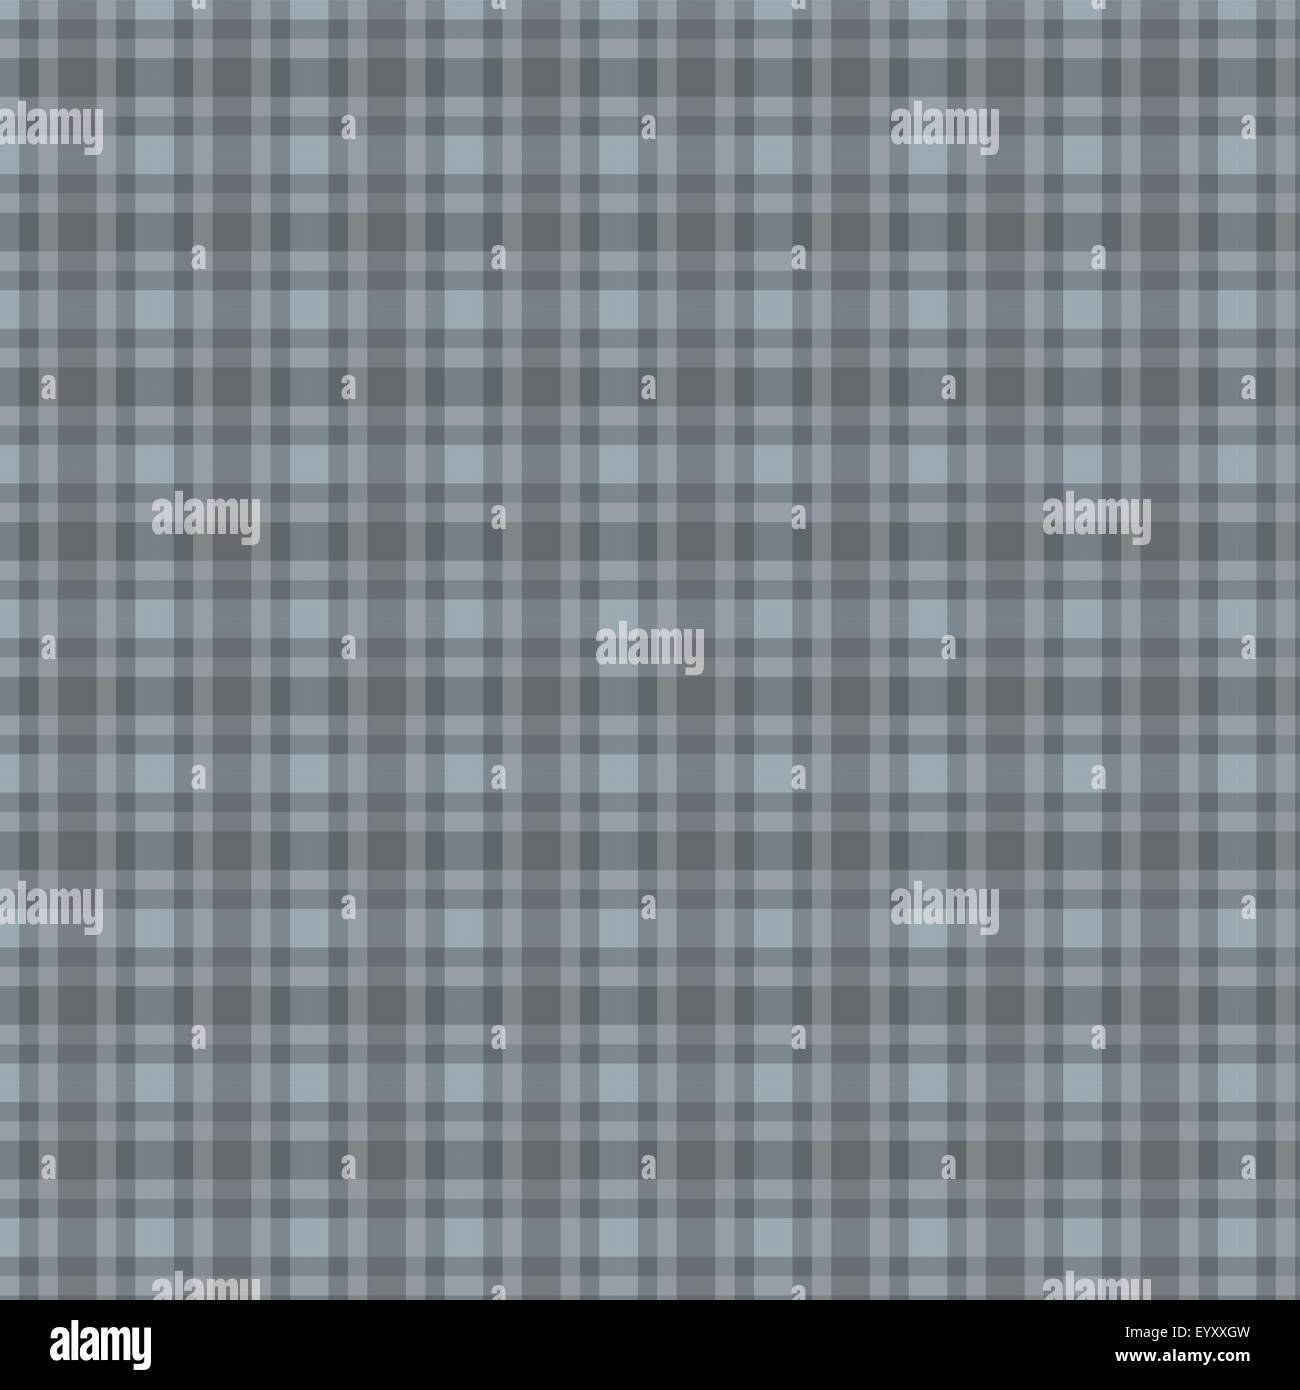 Textured vector plaid pattern background Stock Vector